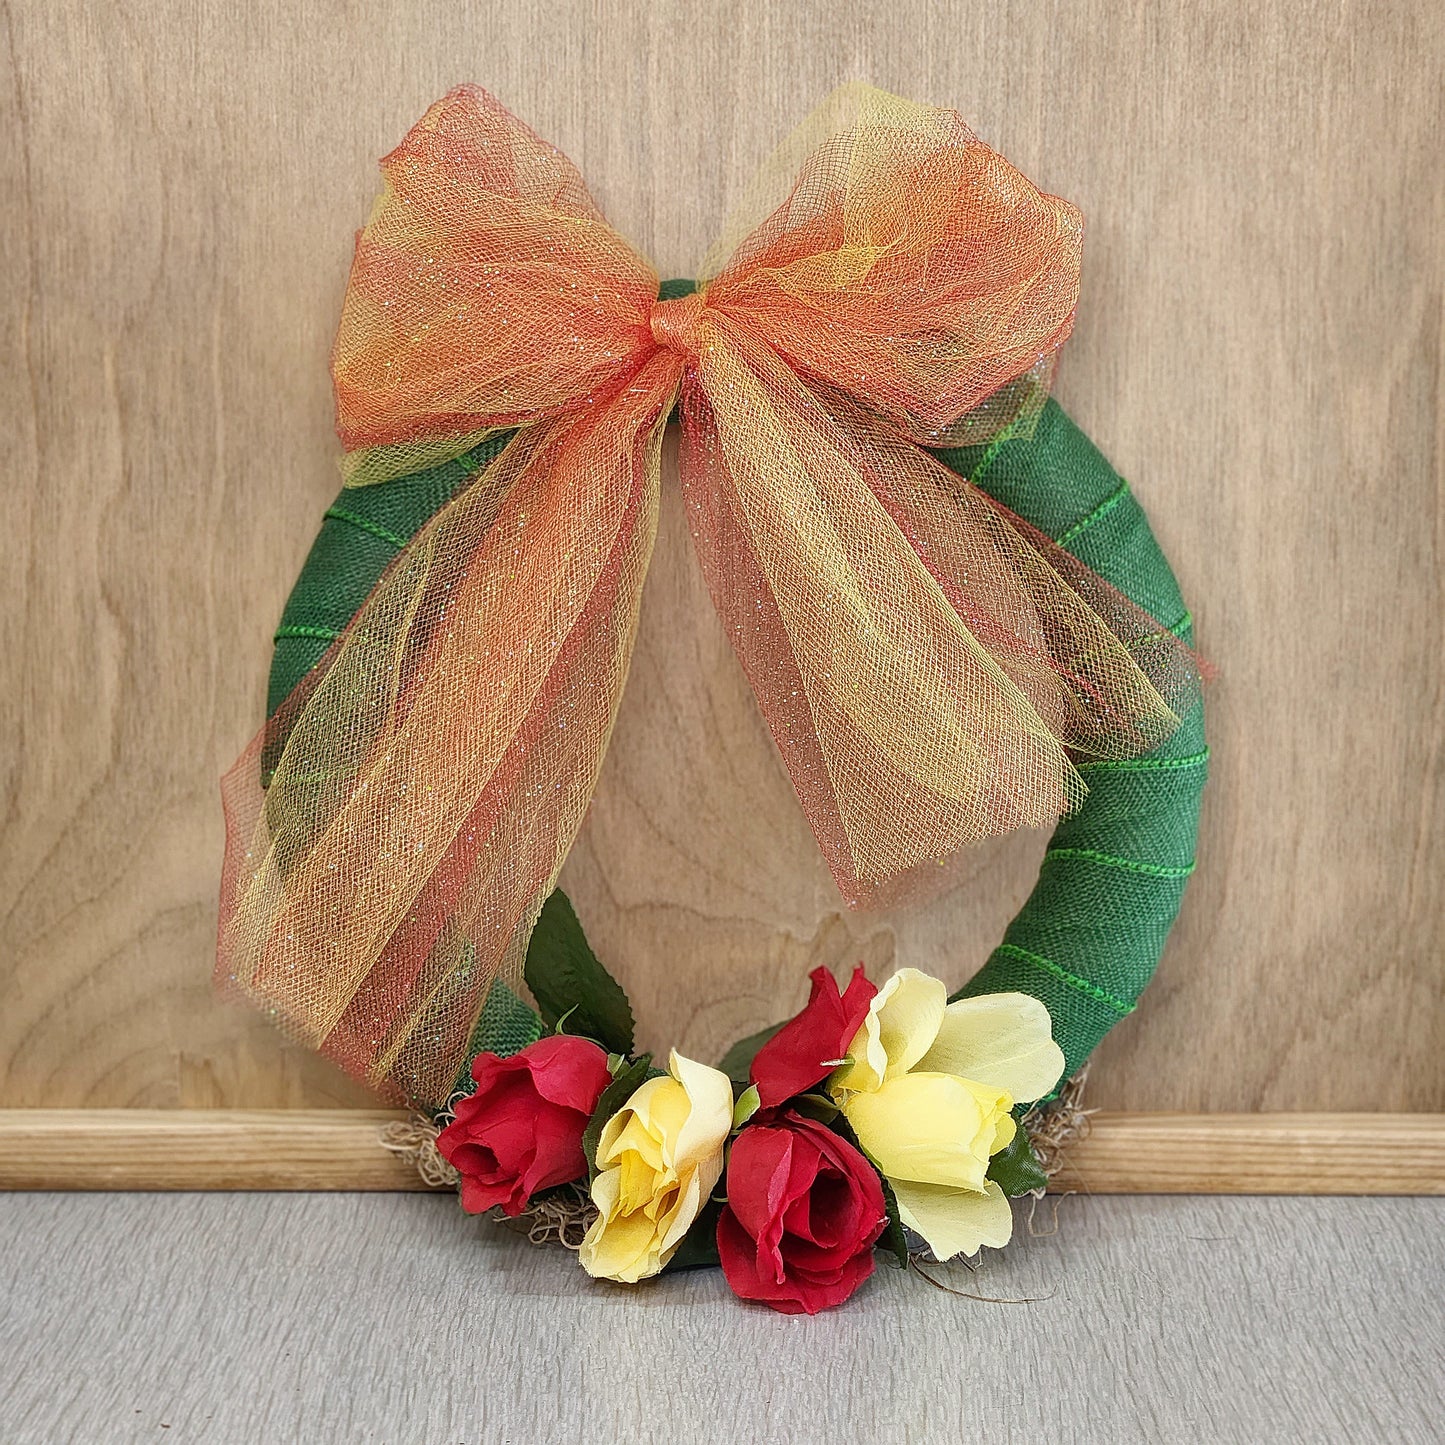 Hand Wrapped Wreaths